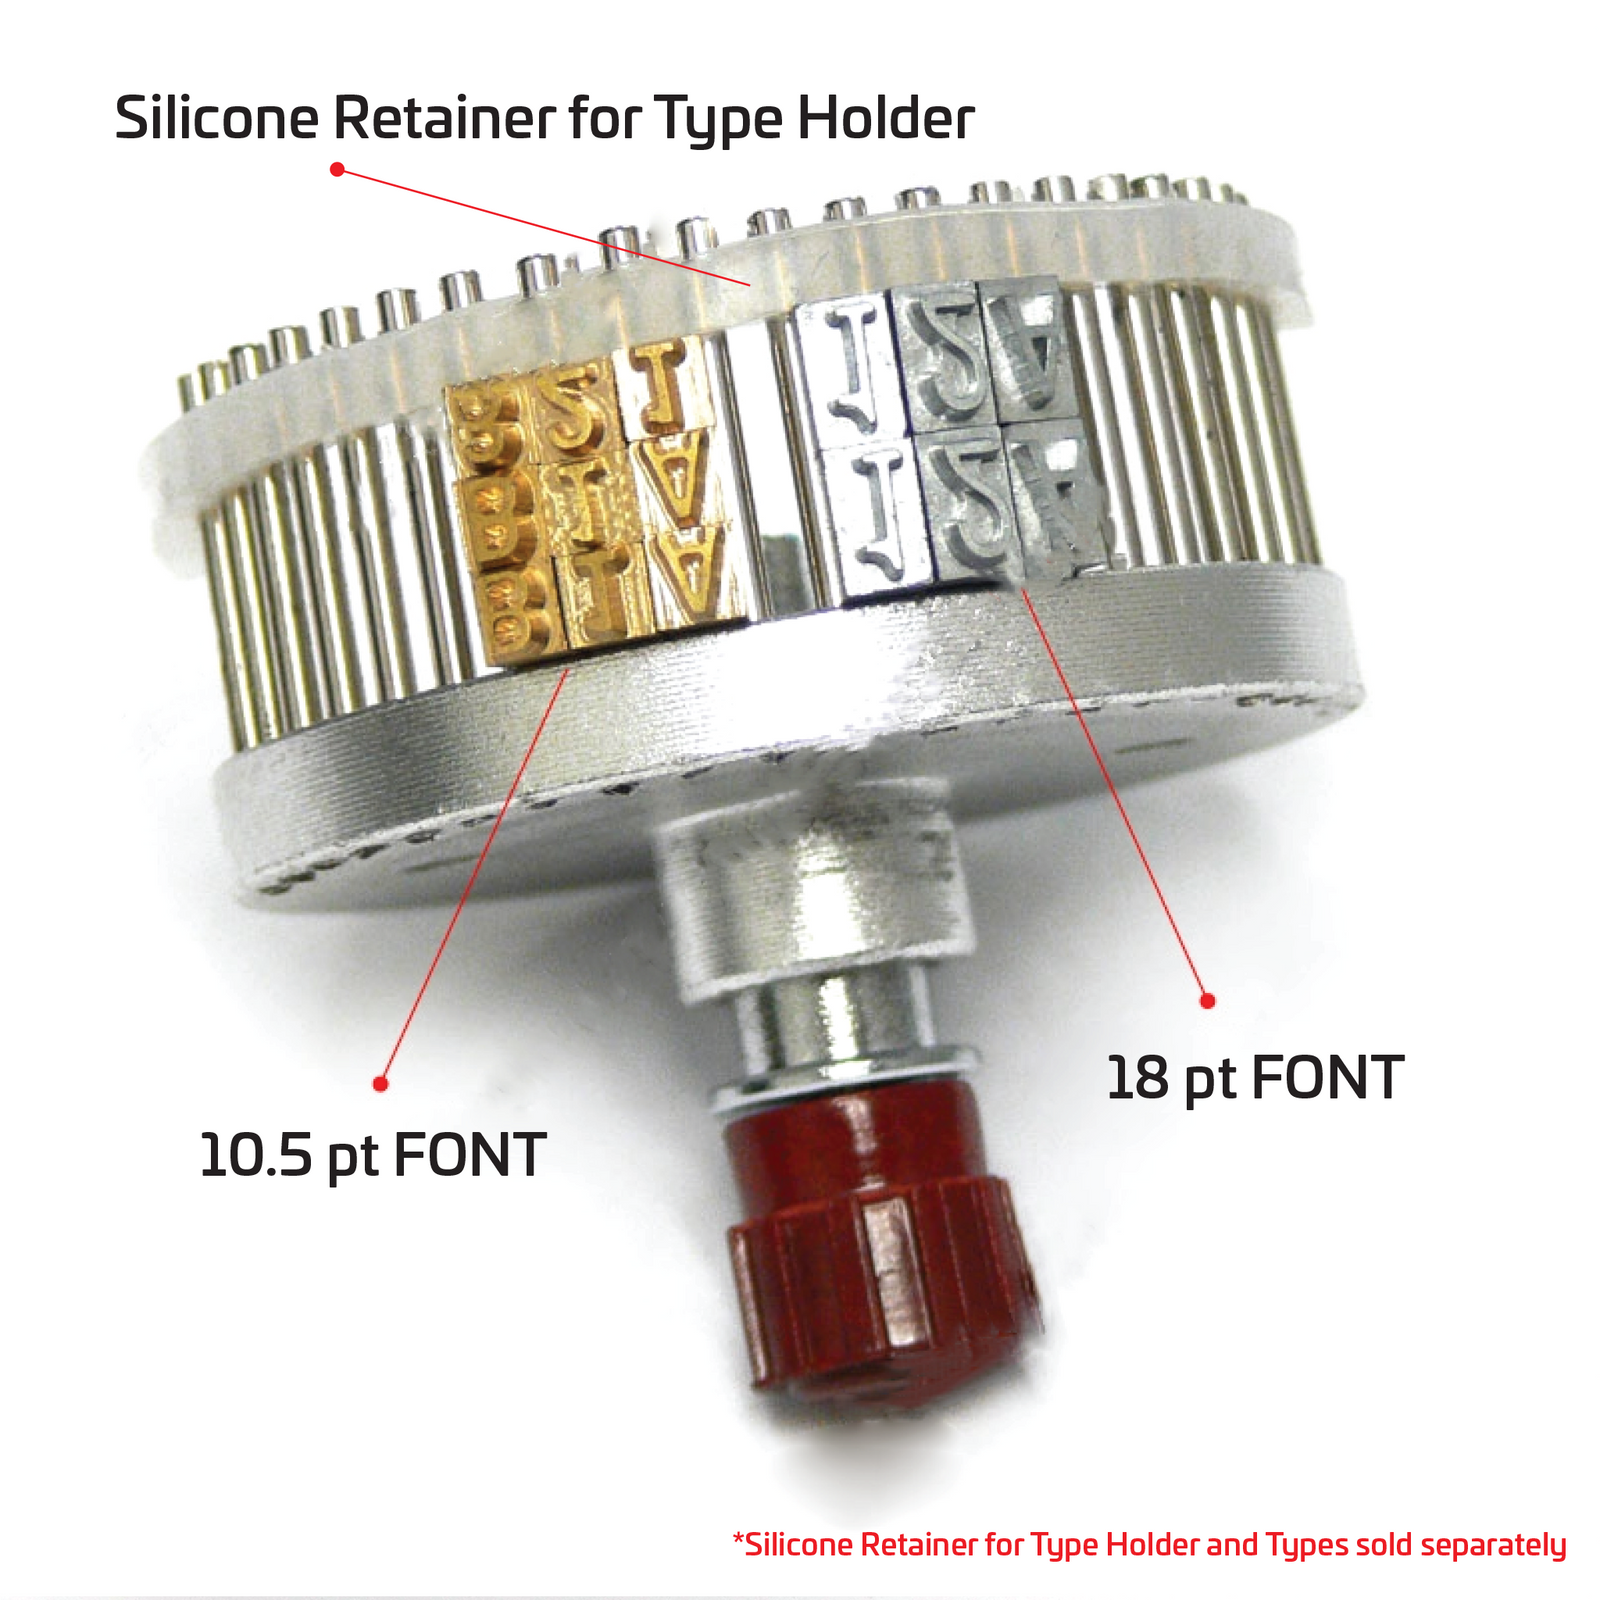 Type holder for hot ink roll printing and types that the JORES TECHNOLOGIES® continuous Band sealer with coder uses. Text mentions the size of fonts used are 10.5 pt and 18 pt. Also shown where the silicone retainer for type holder is placed and it states that types and retainer are sold separately